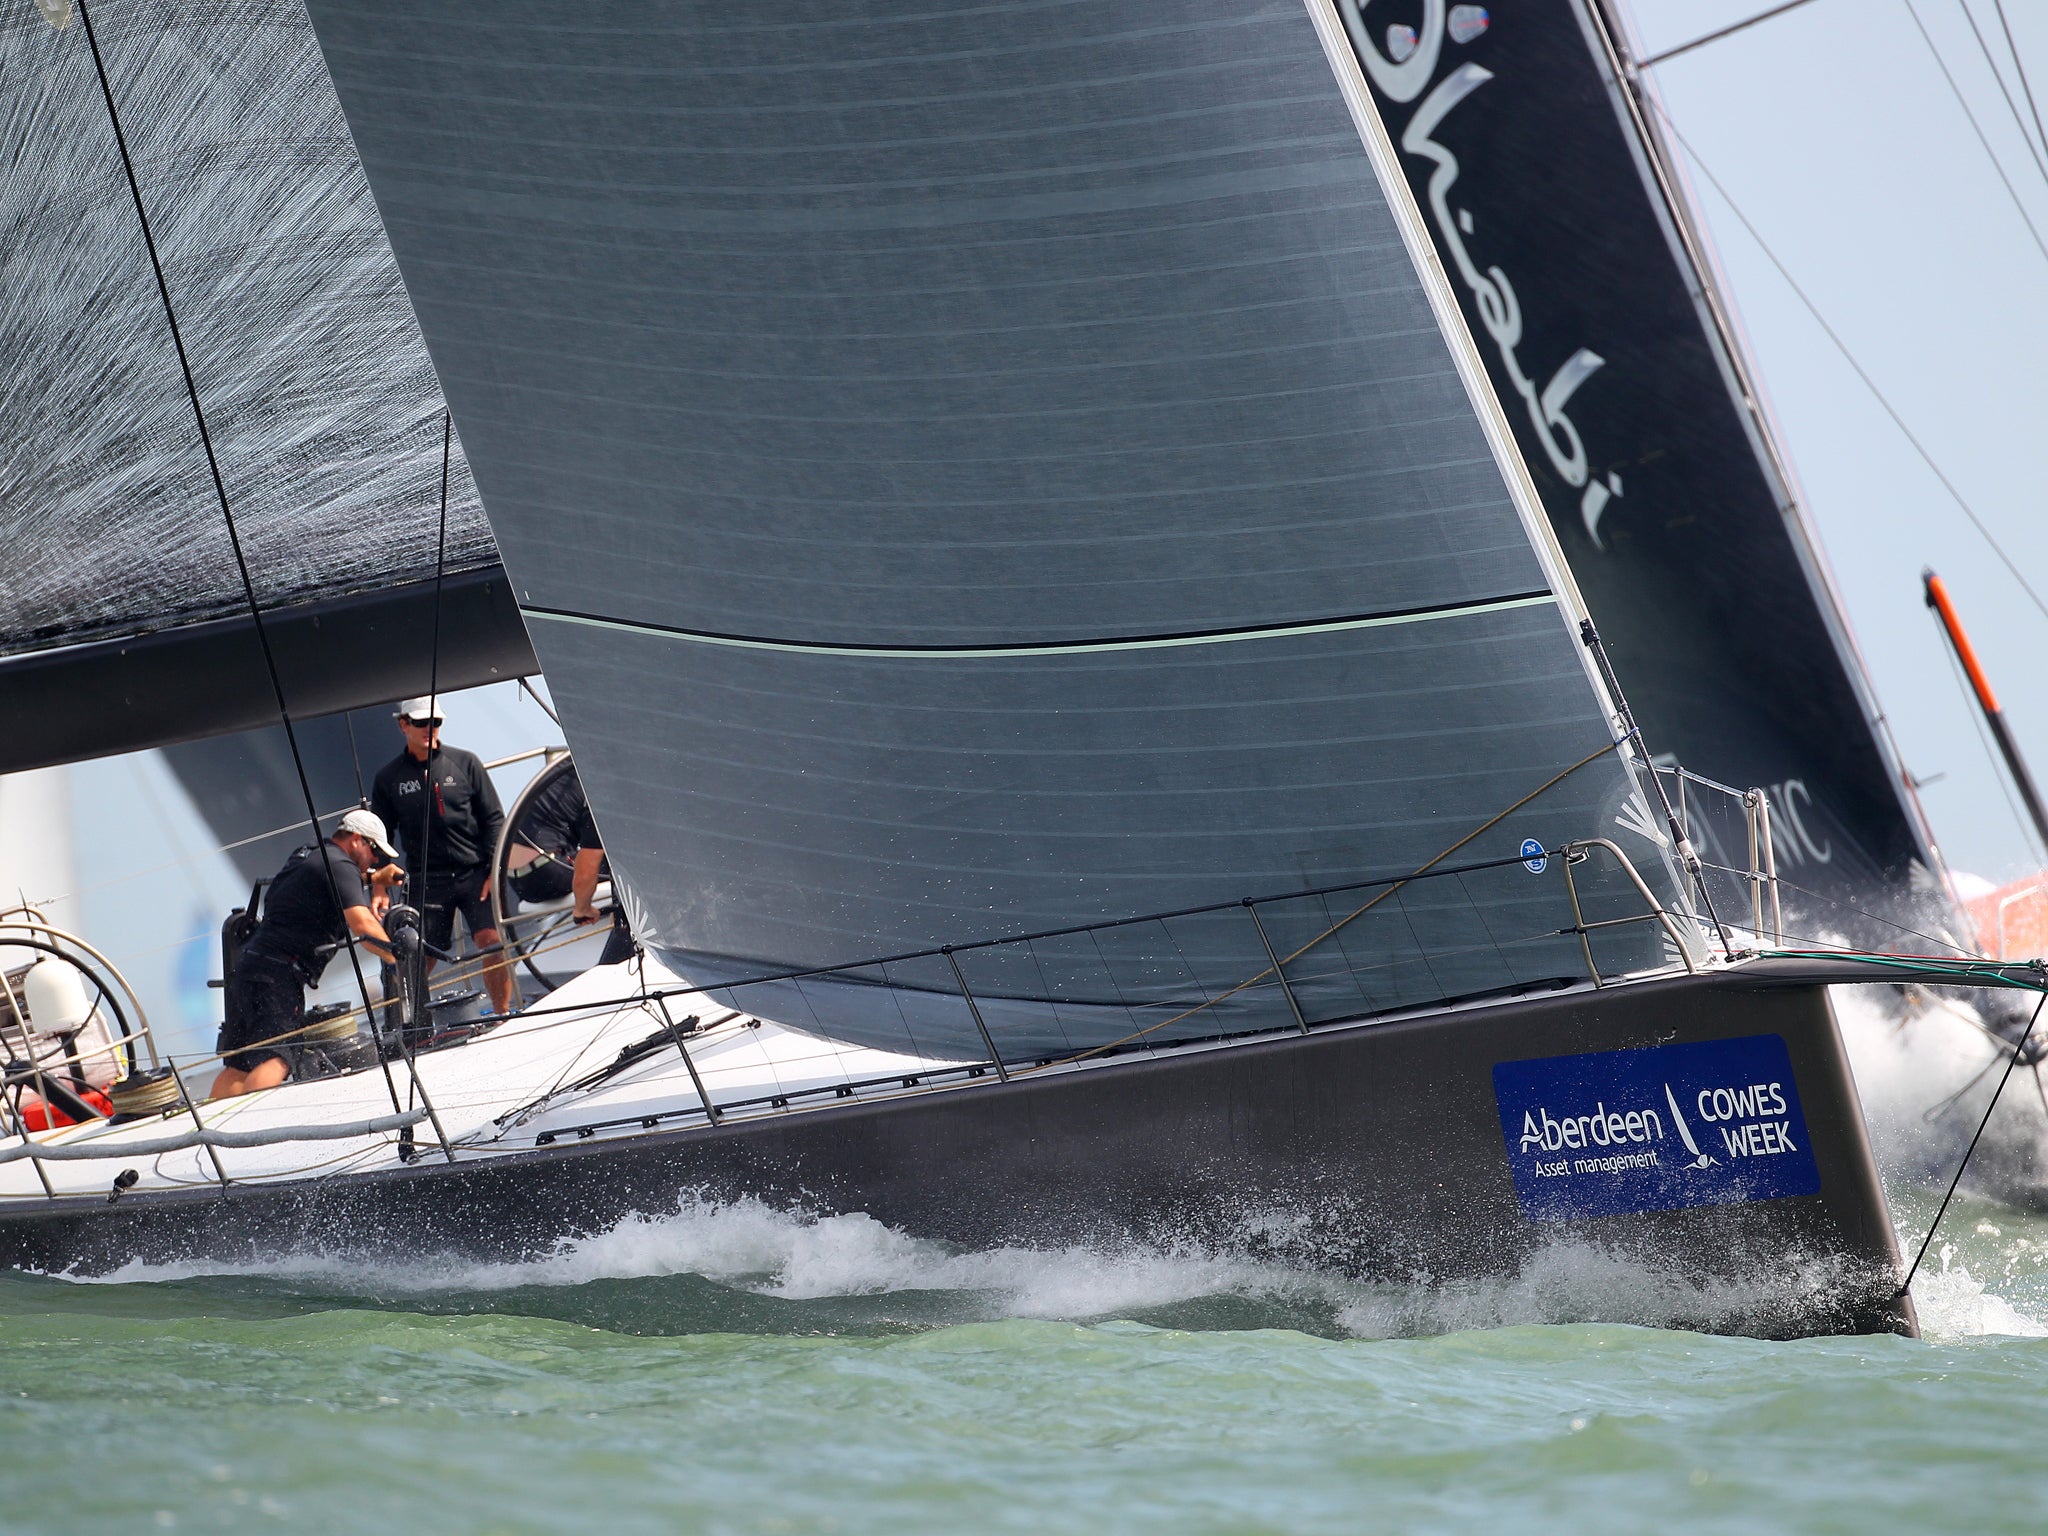 Niklas Zennstrôm’s 72-foot Rán added to its impressive haul of silverware to take the Buckingham Coronation Challenge Bowl in AAM Cowes Week